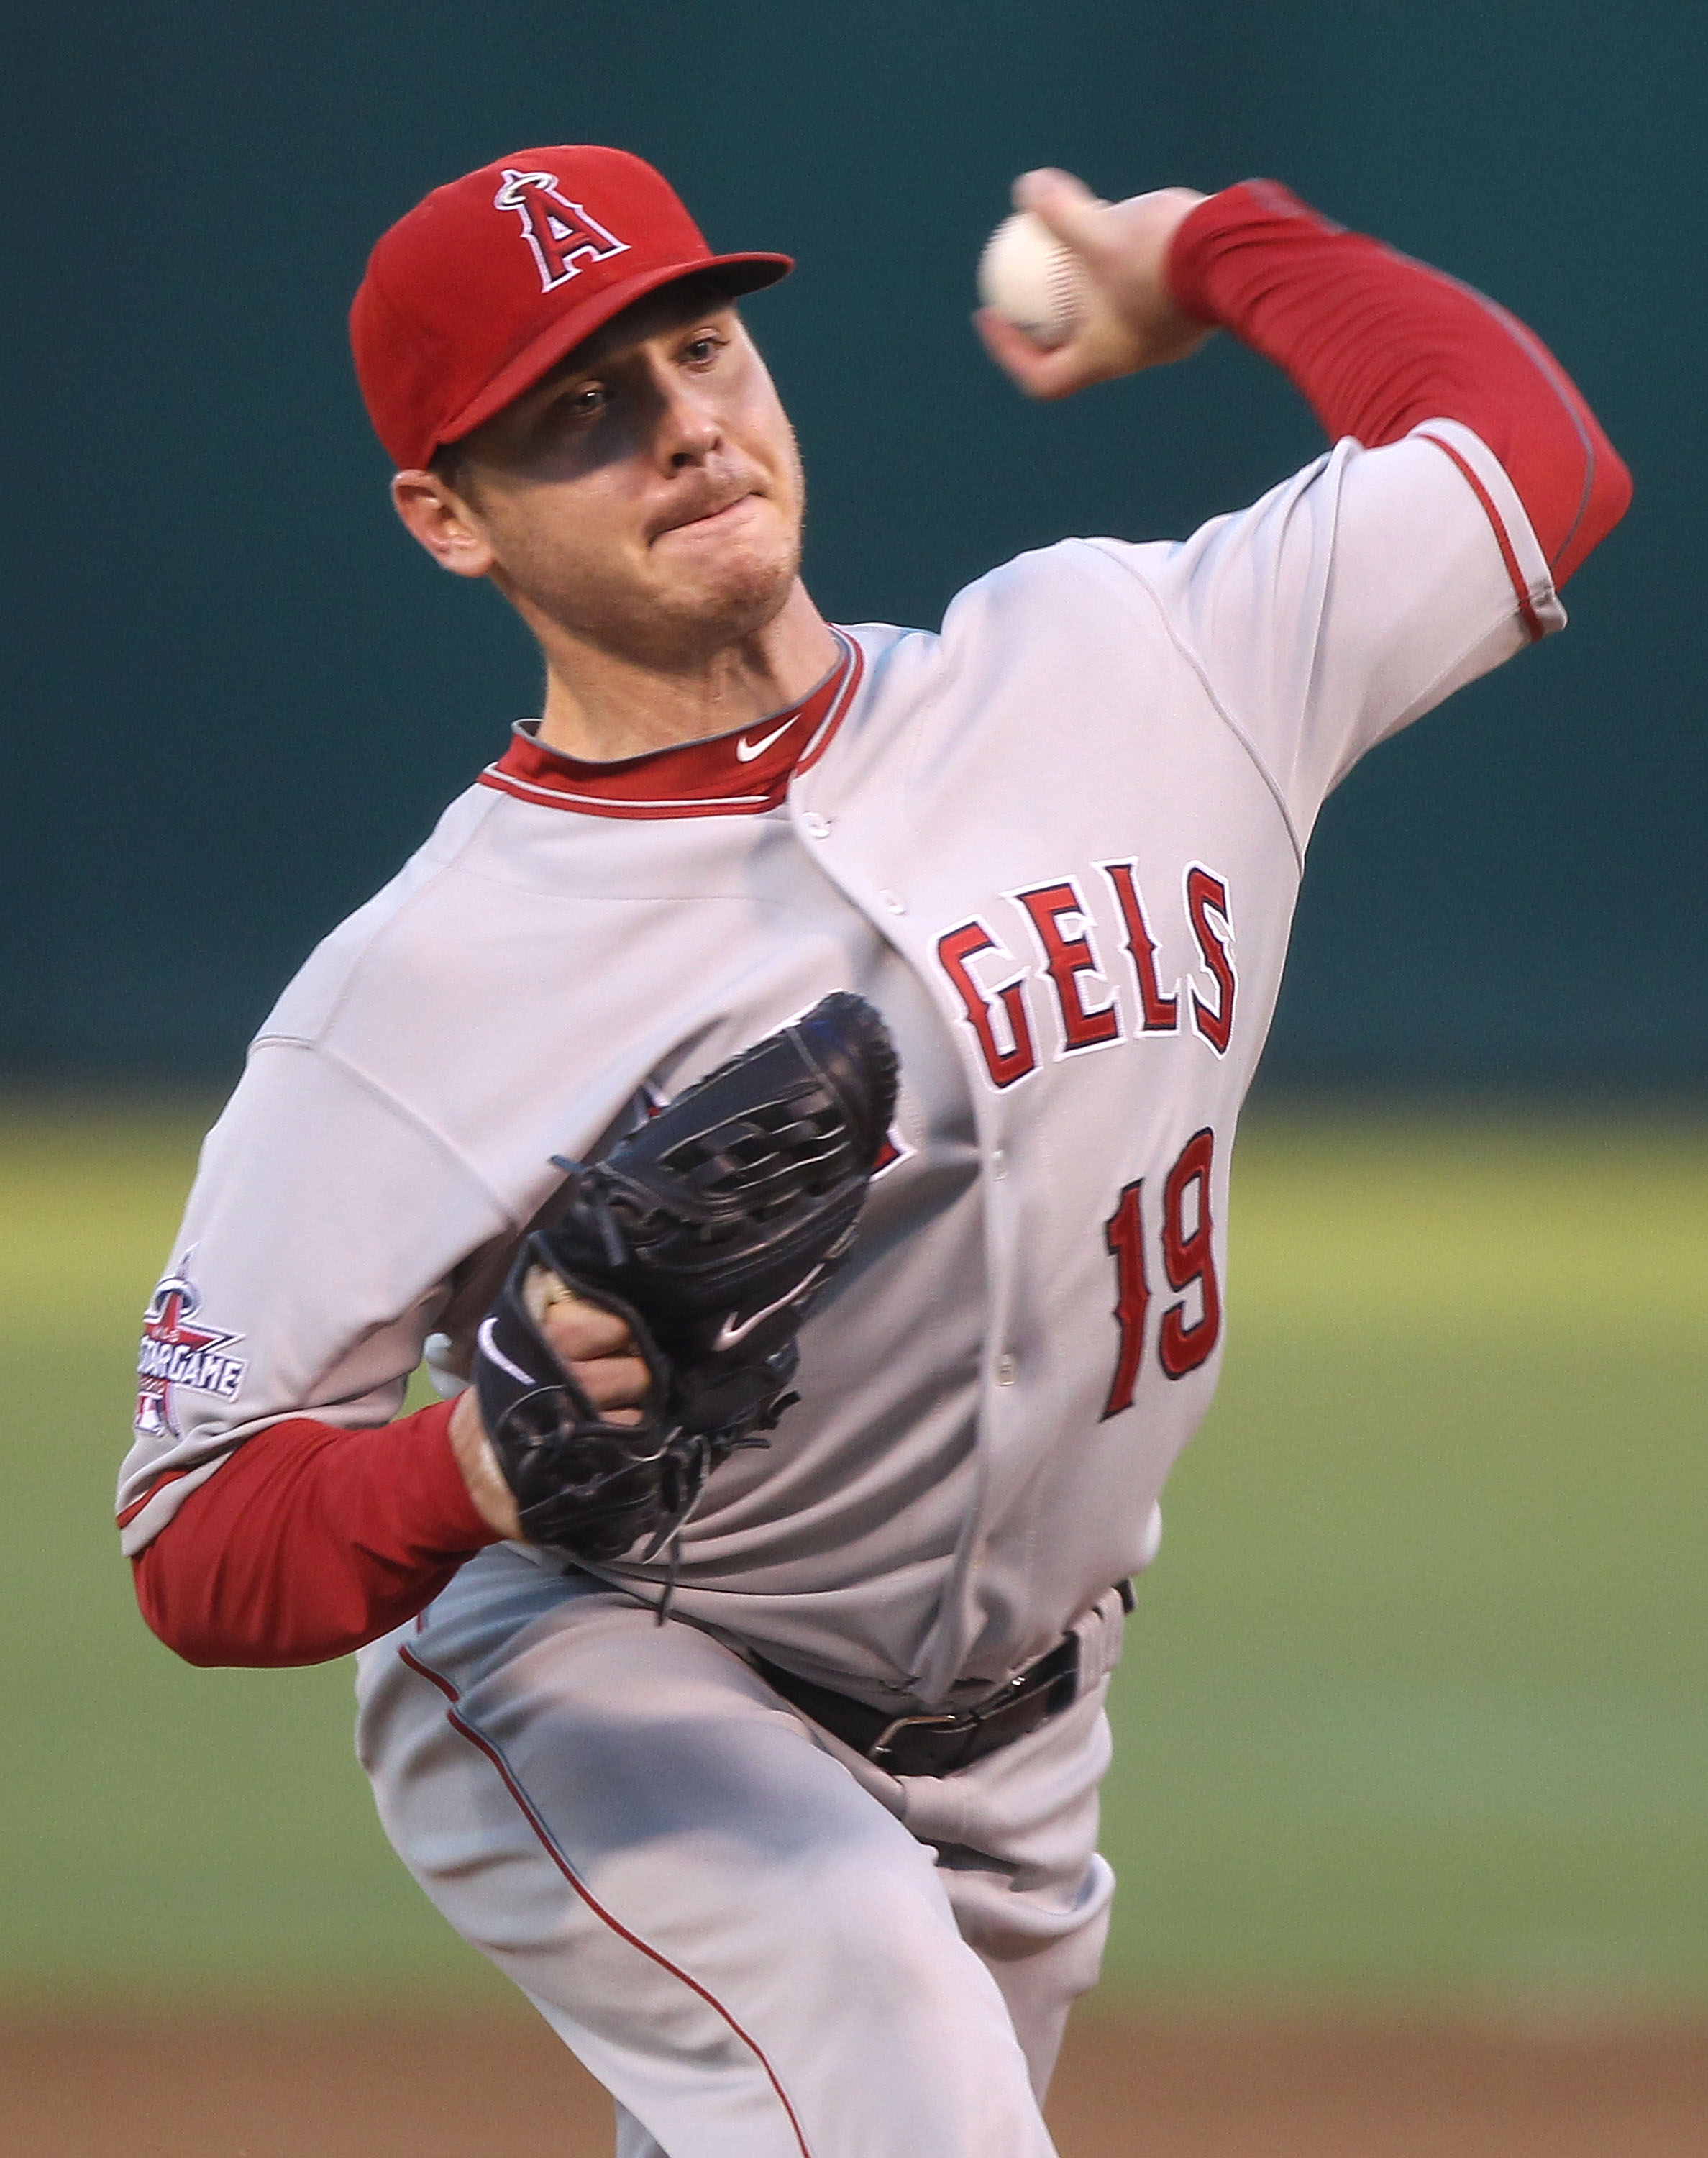 OAKLAND, CA - SEPTEMBER 03:  Scott Kazmir #19 of the Los Angeles Angels of Anaheim pitches against the Oakland Athletics during a Major League Baseball game at the Oakland-Alameda County Coliseum on September 3, 2010 in Oakland, California.  (Photo by Jed